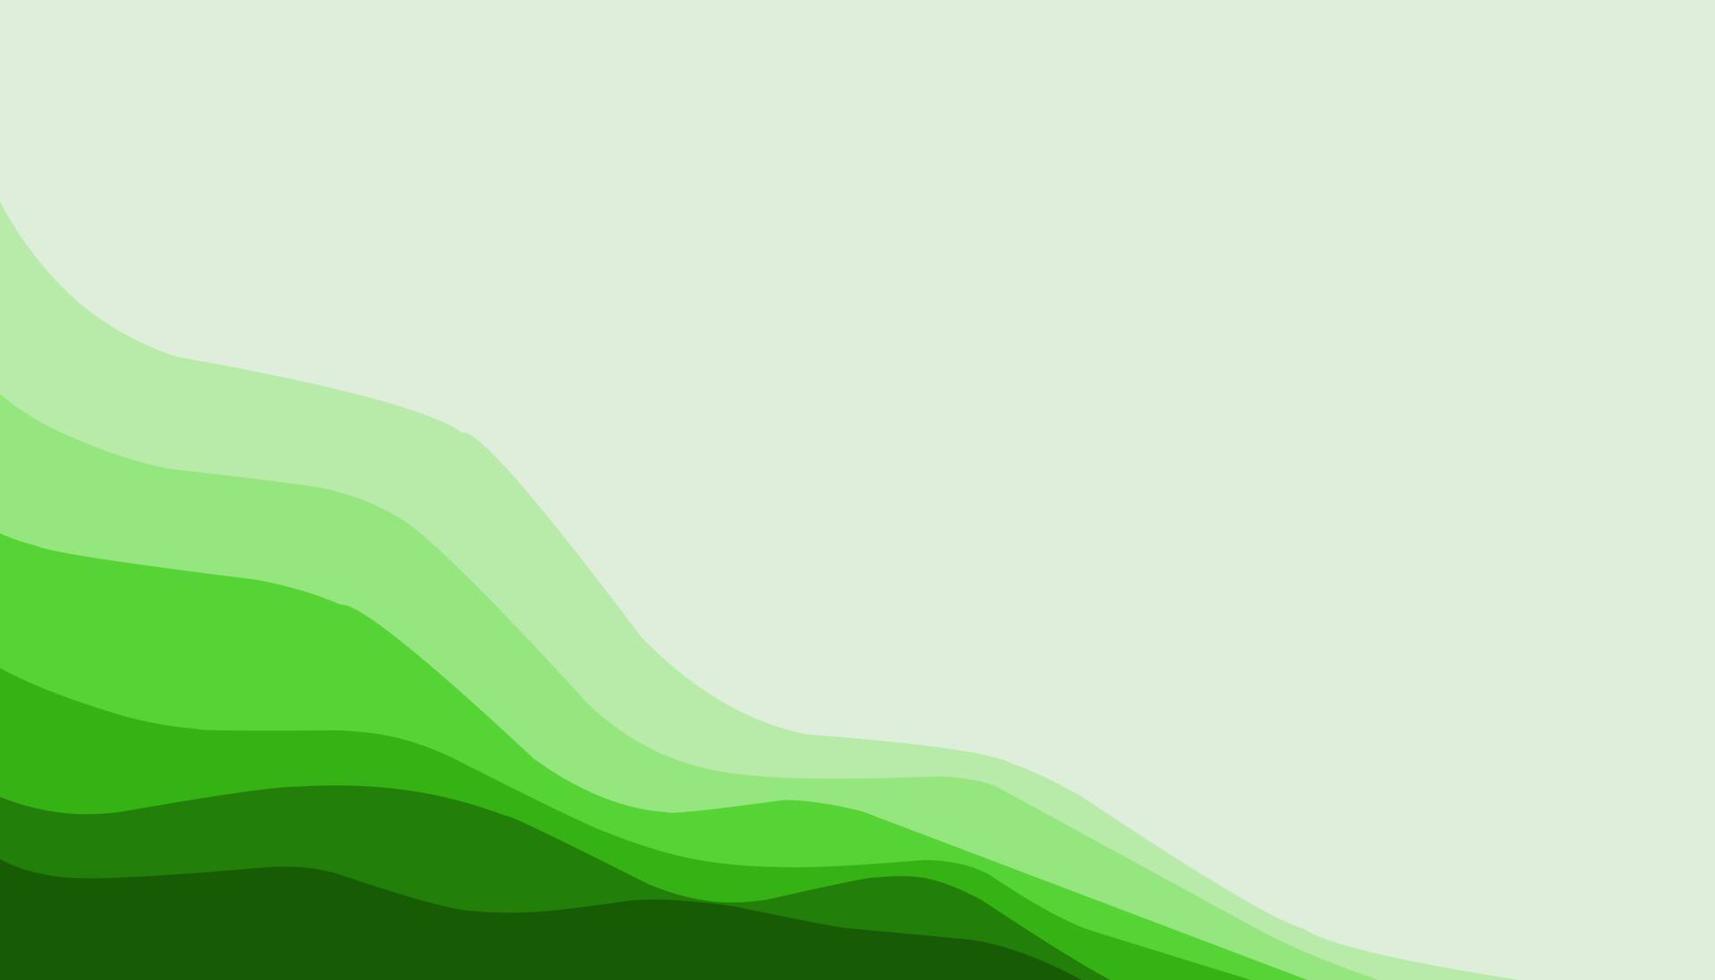 Abstract background illustration of green waves vector